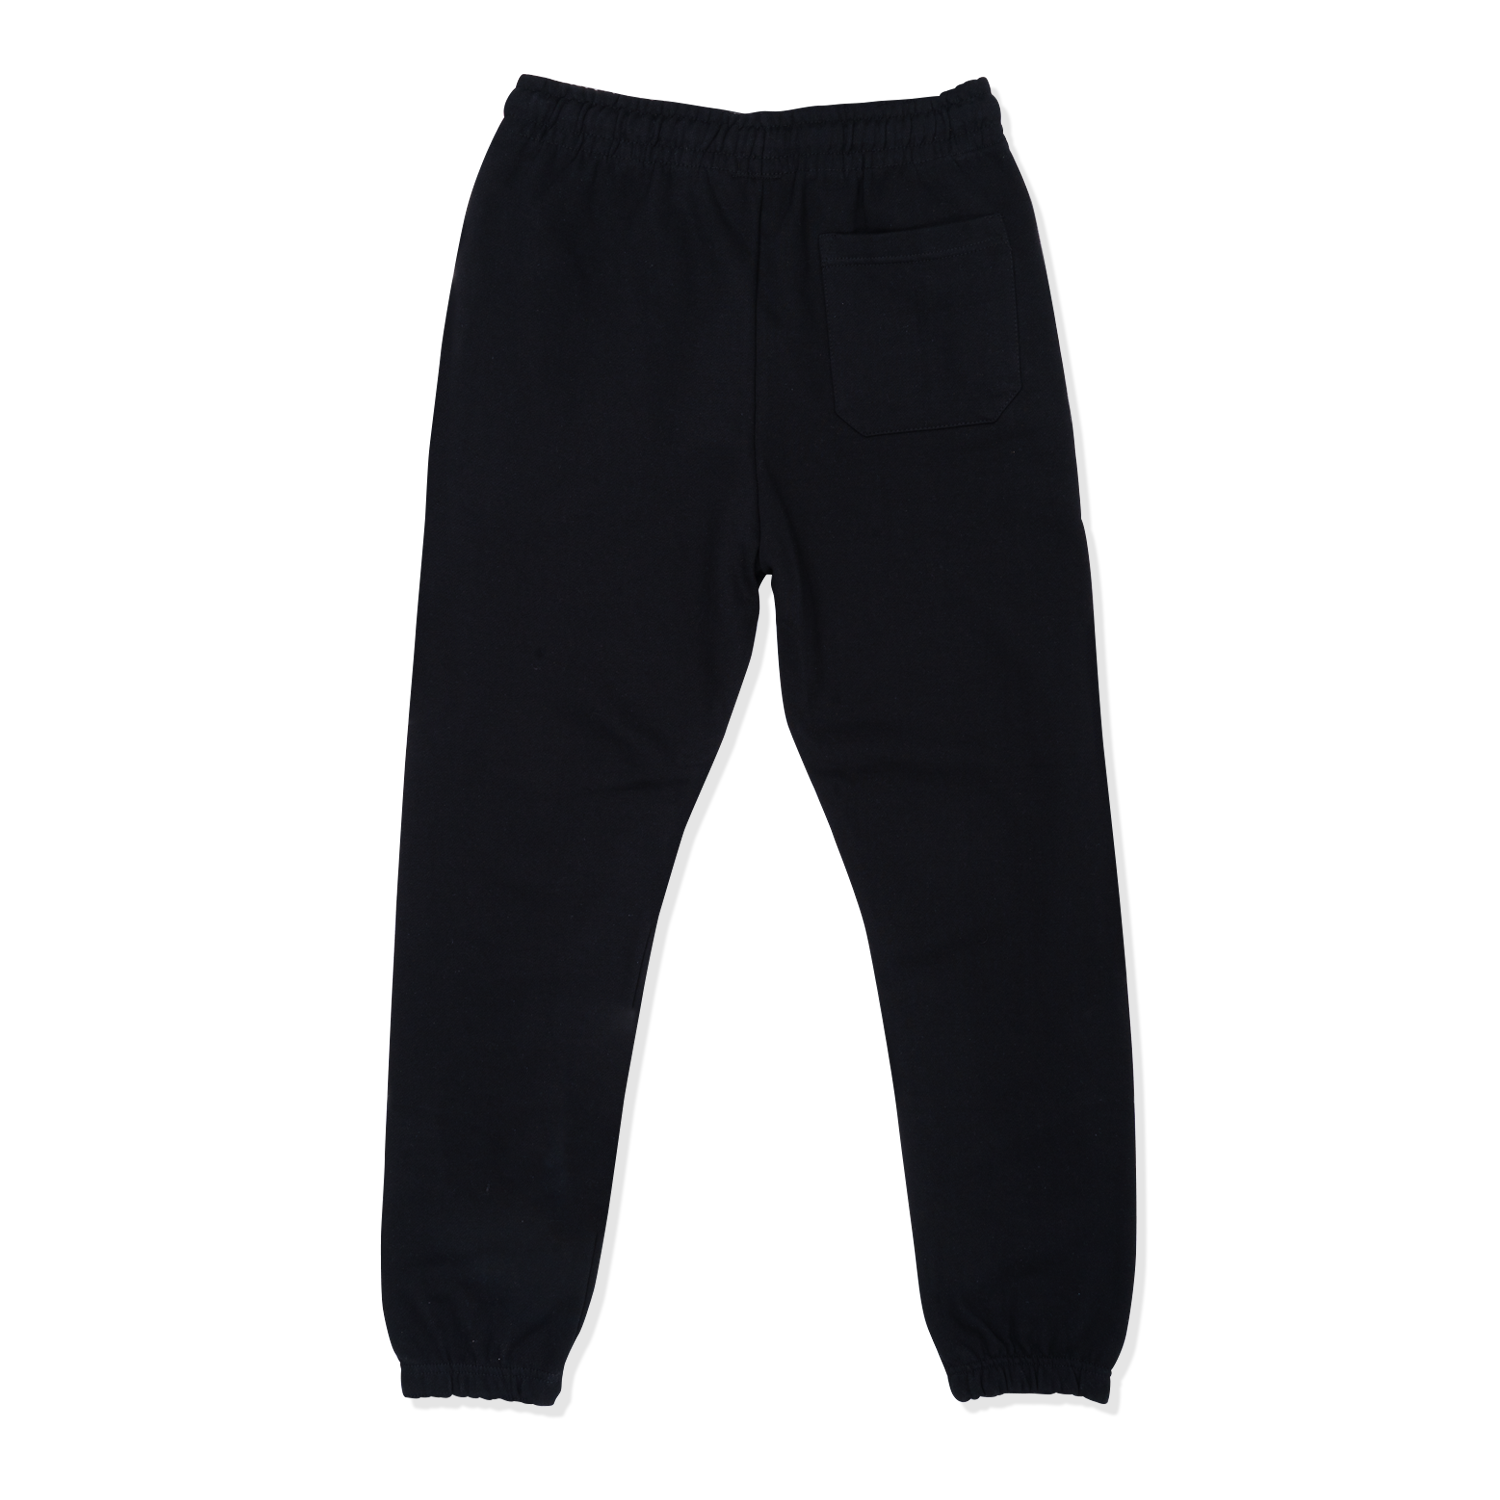 Ayylien Made in Space Joggers - Black